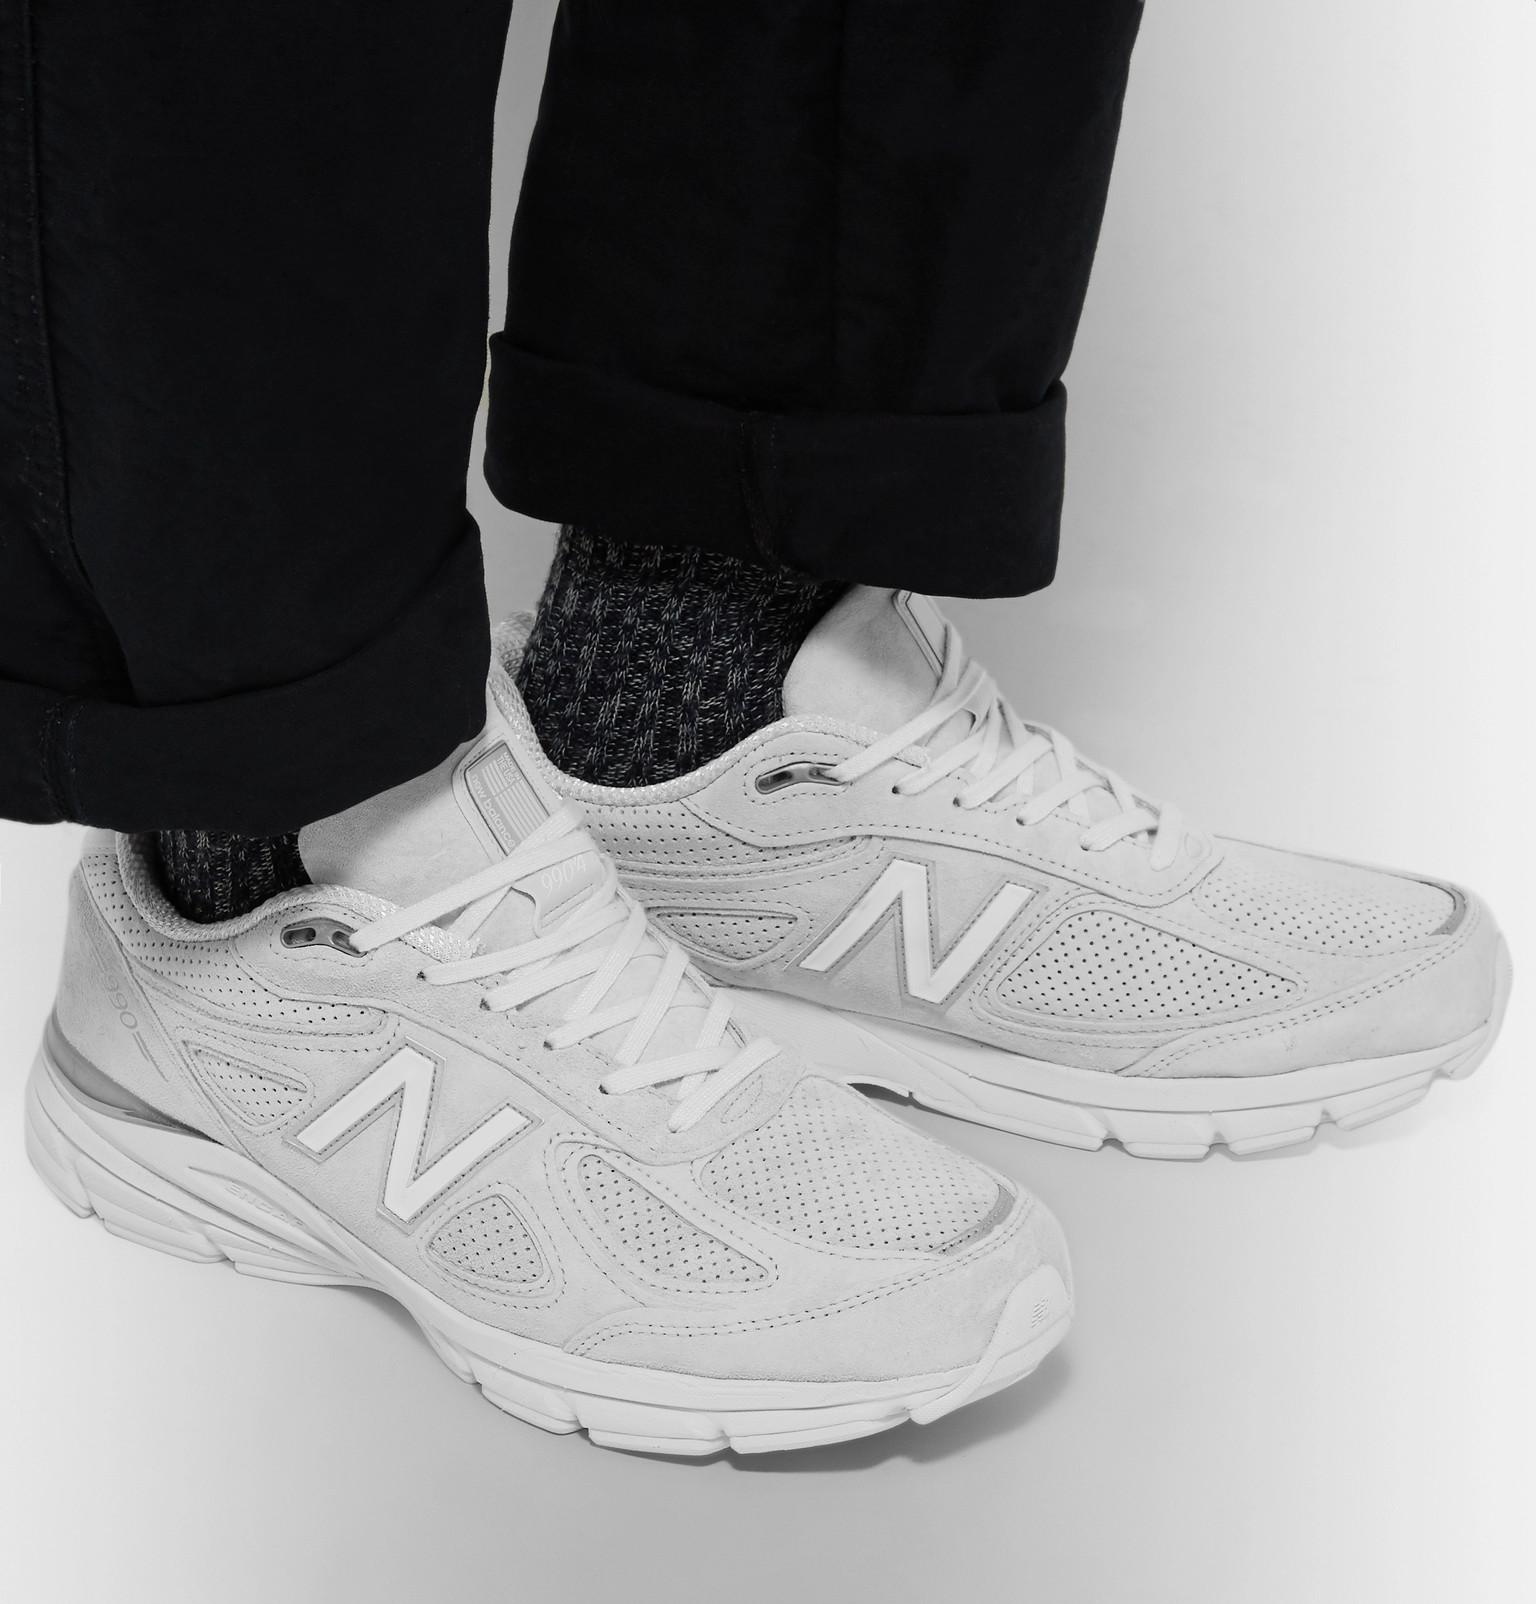 New Balance 990 Suede Sneakers in White 